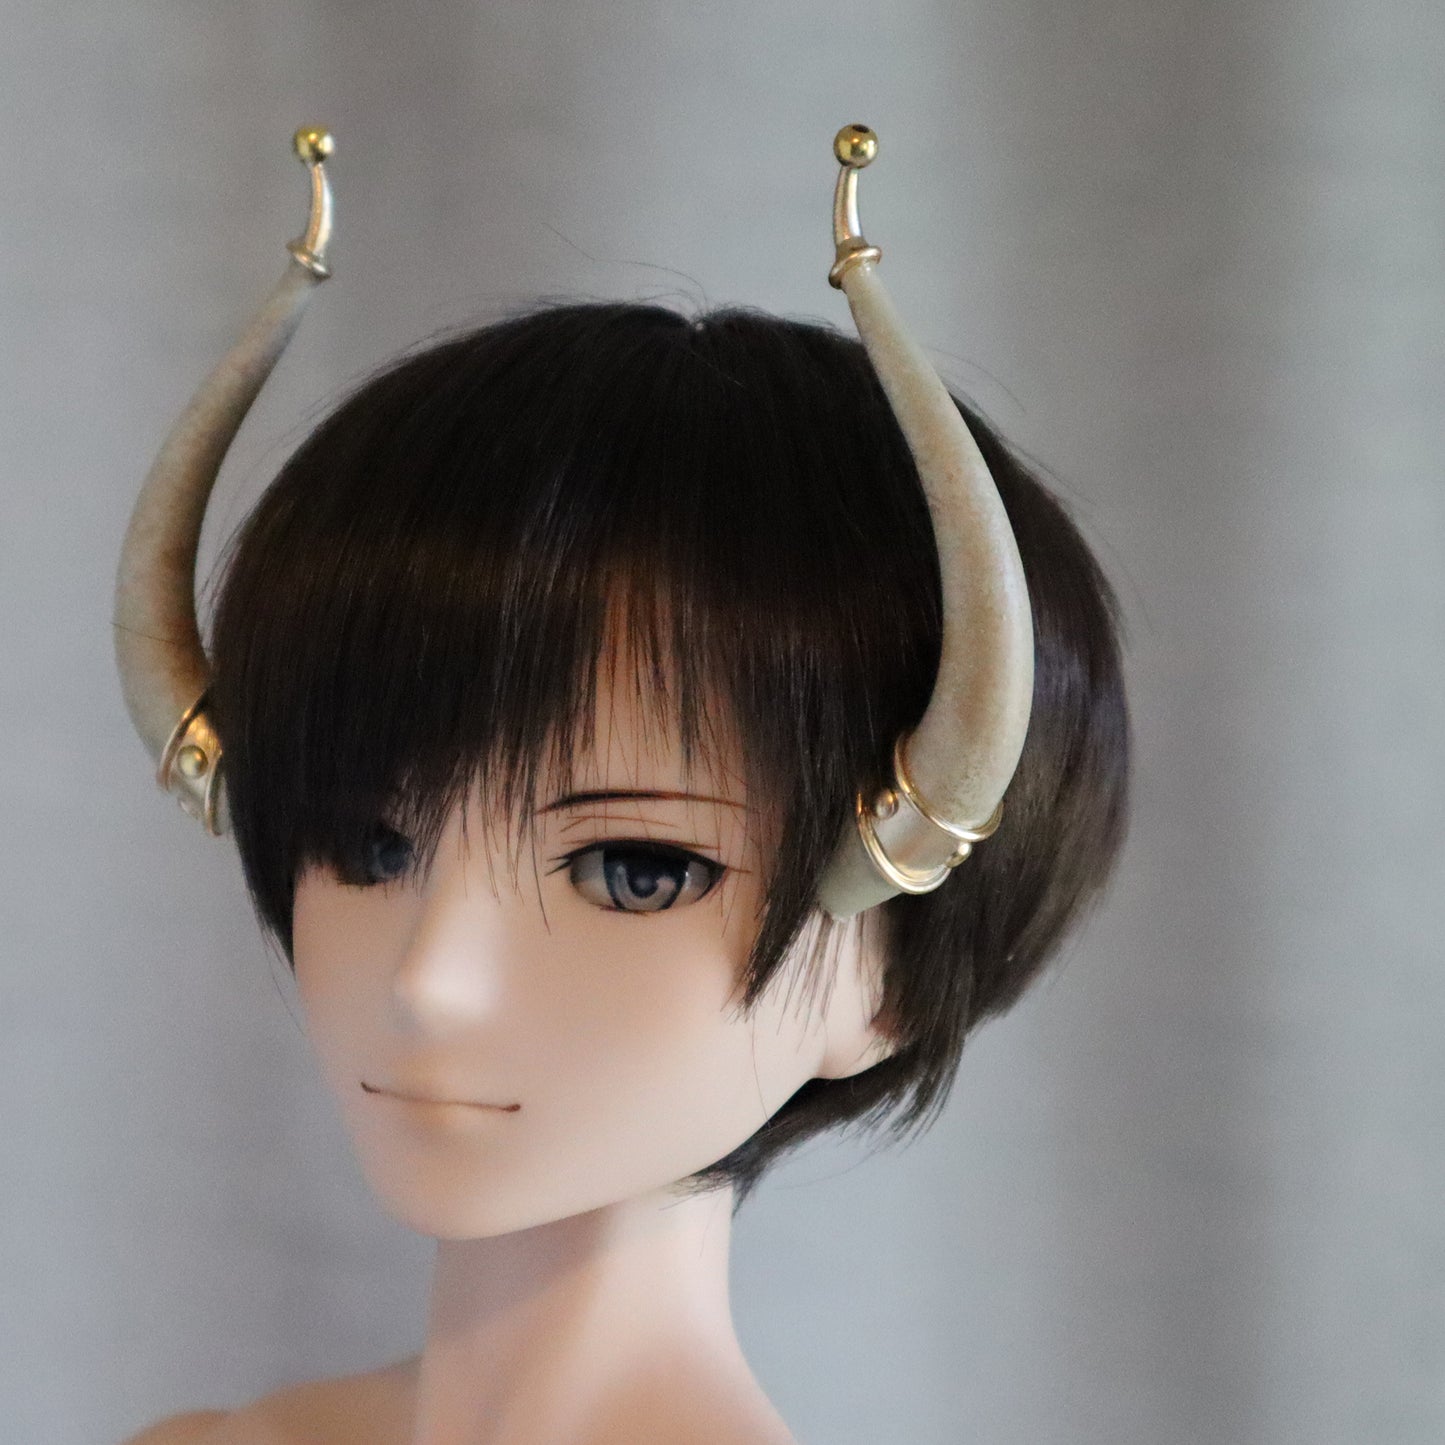 Magnetic Cosplay / Costume Horns - Minotaur Style